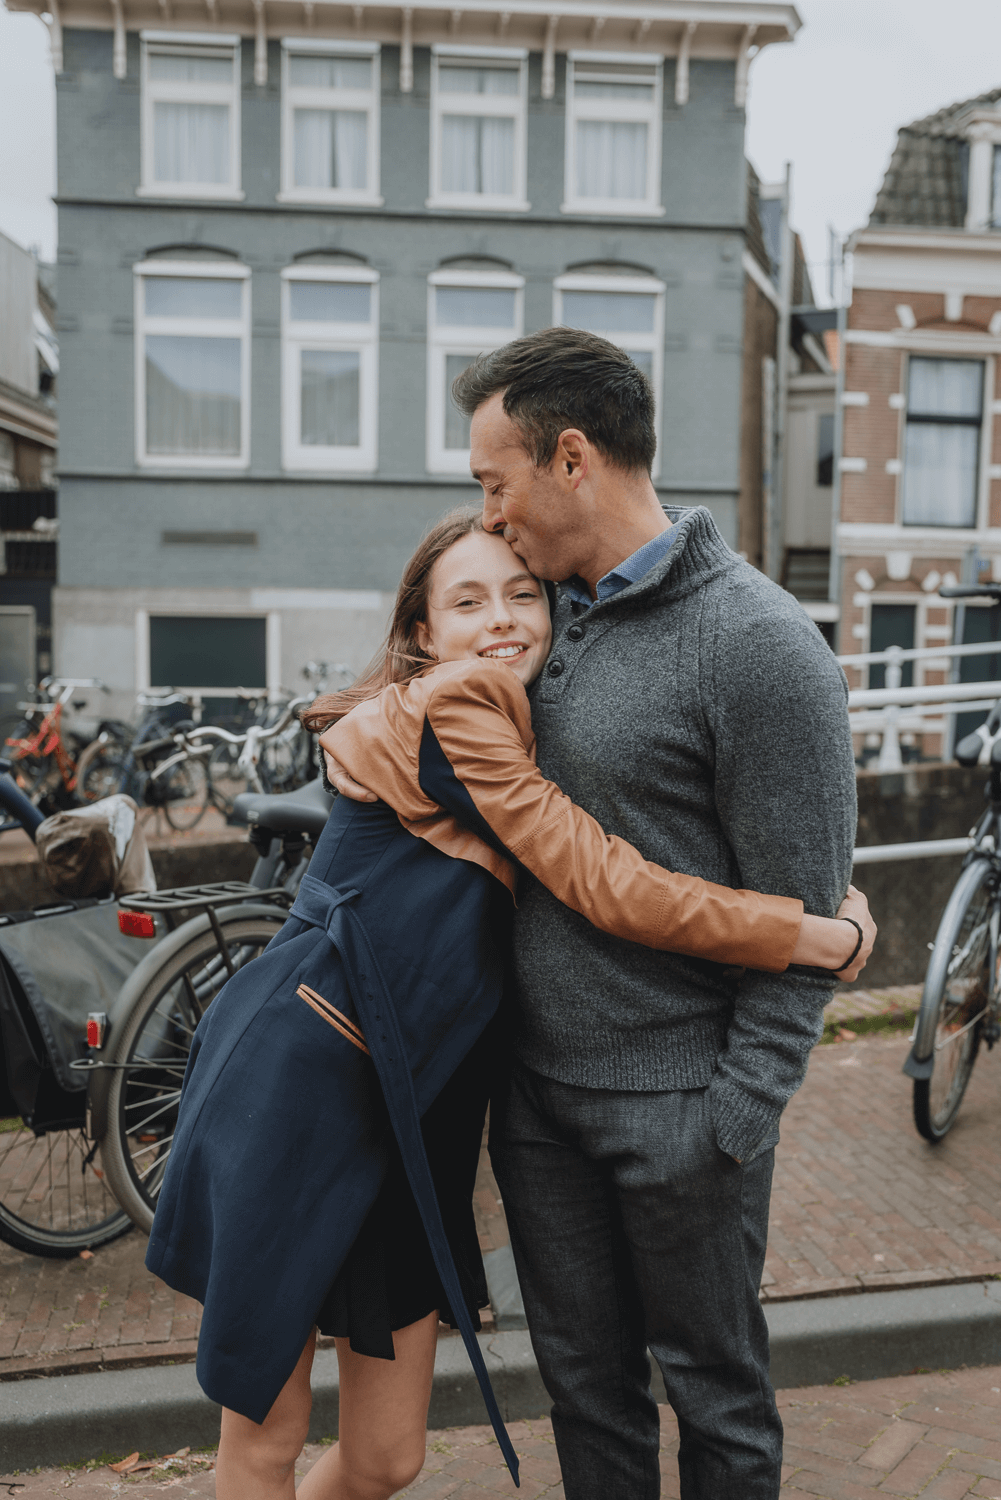 Gift Card Photoshoot in Haarlem-Amsterdam by Vicky McLachlan Photography | Bolster Family_7